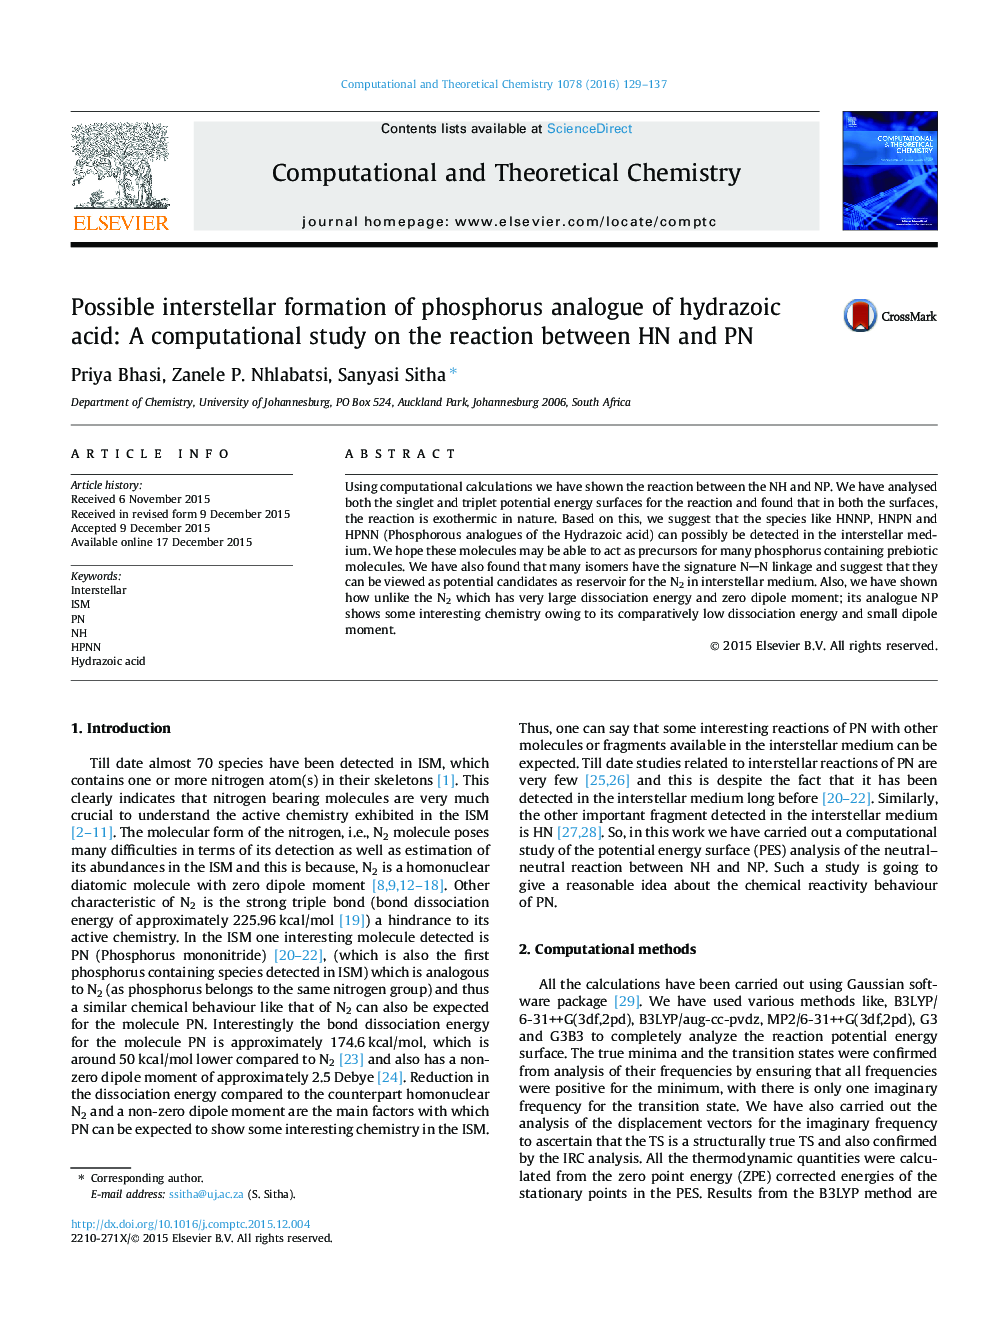 Possible interstellar formation of phosphorus analogue of hydrazoic acid: A computational study on the reaction between HN and PN